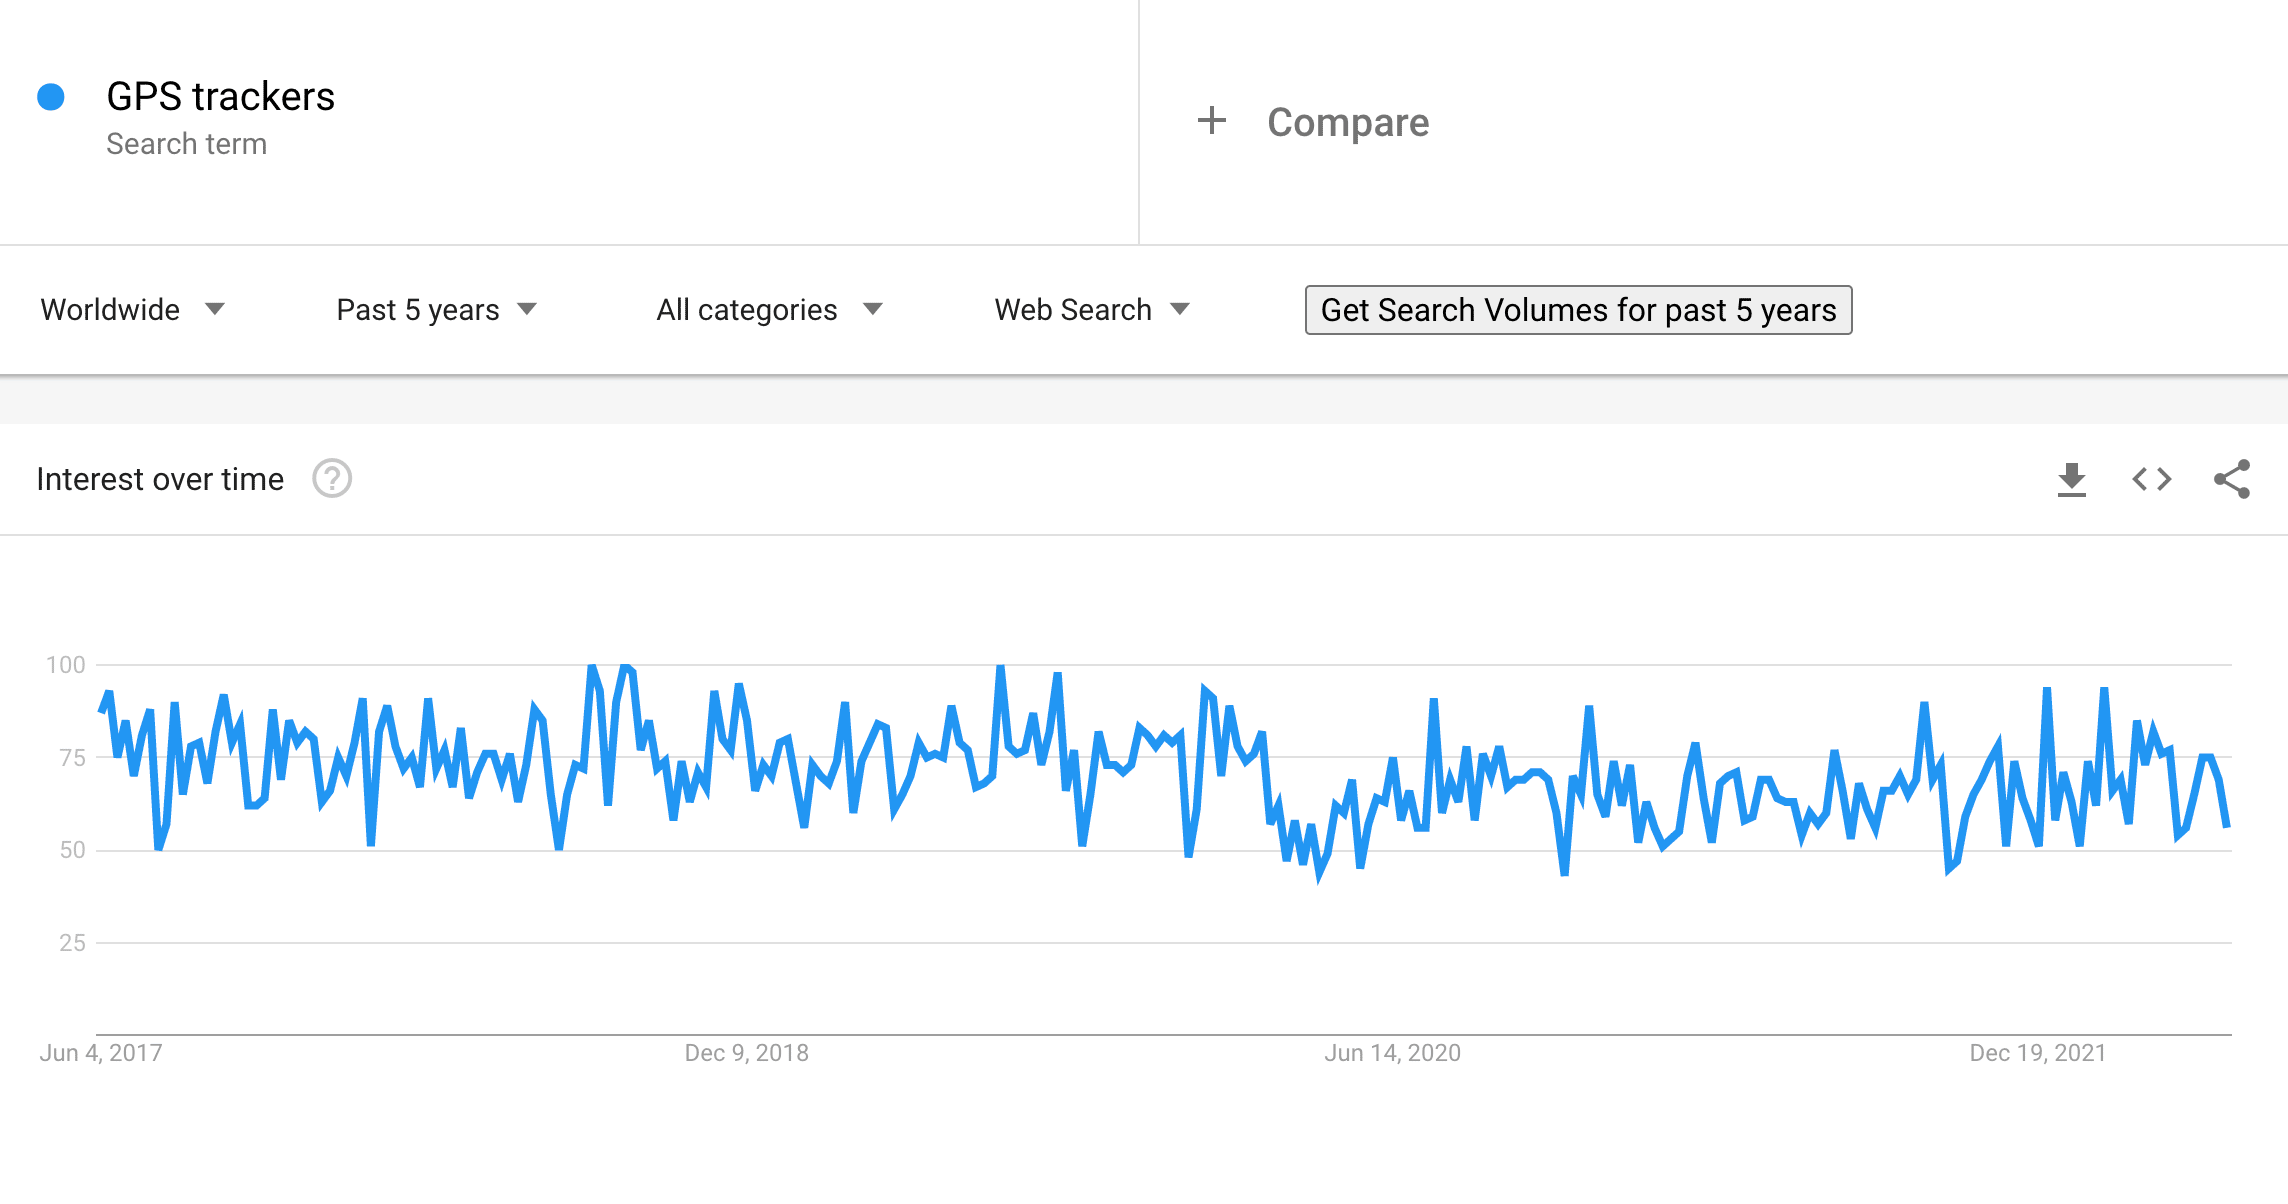 GPS trackers on Google Trends